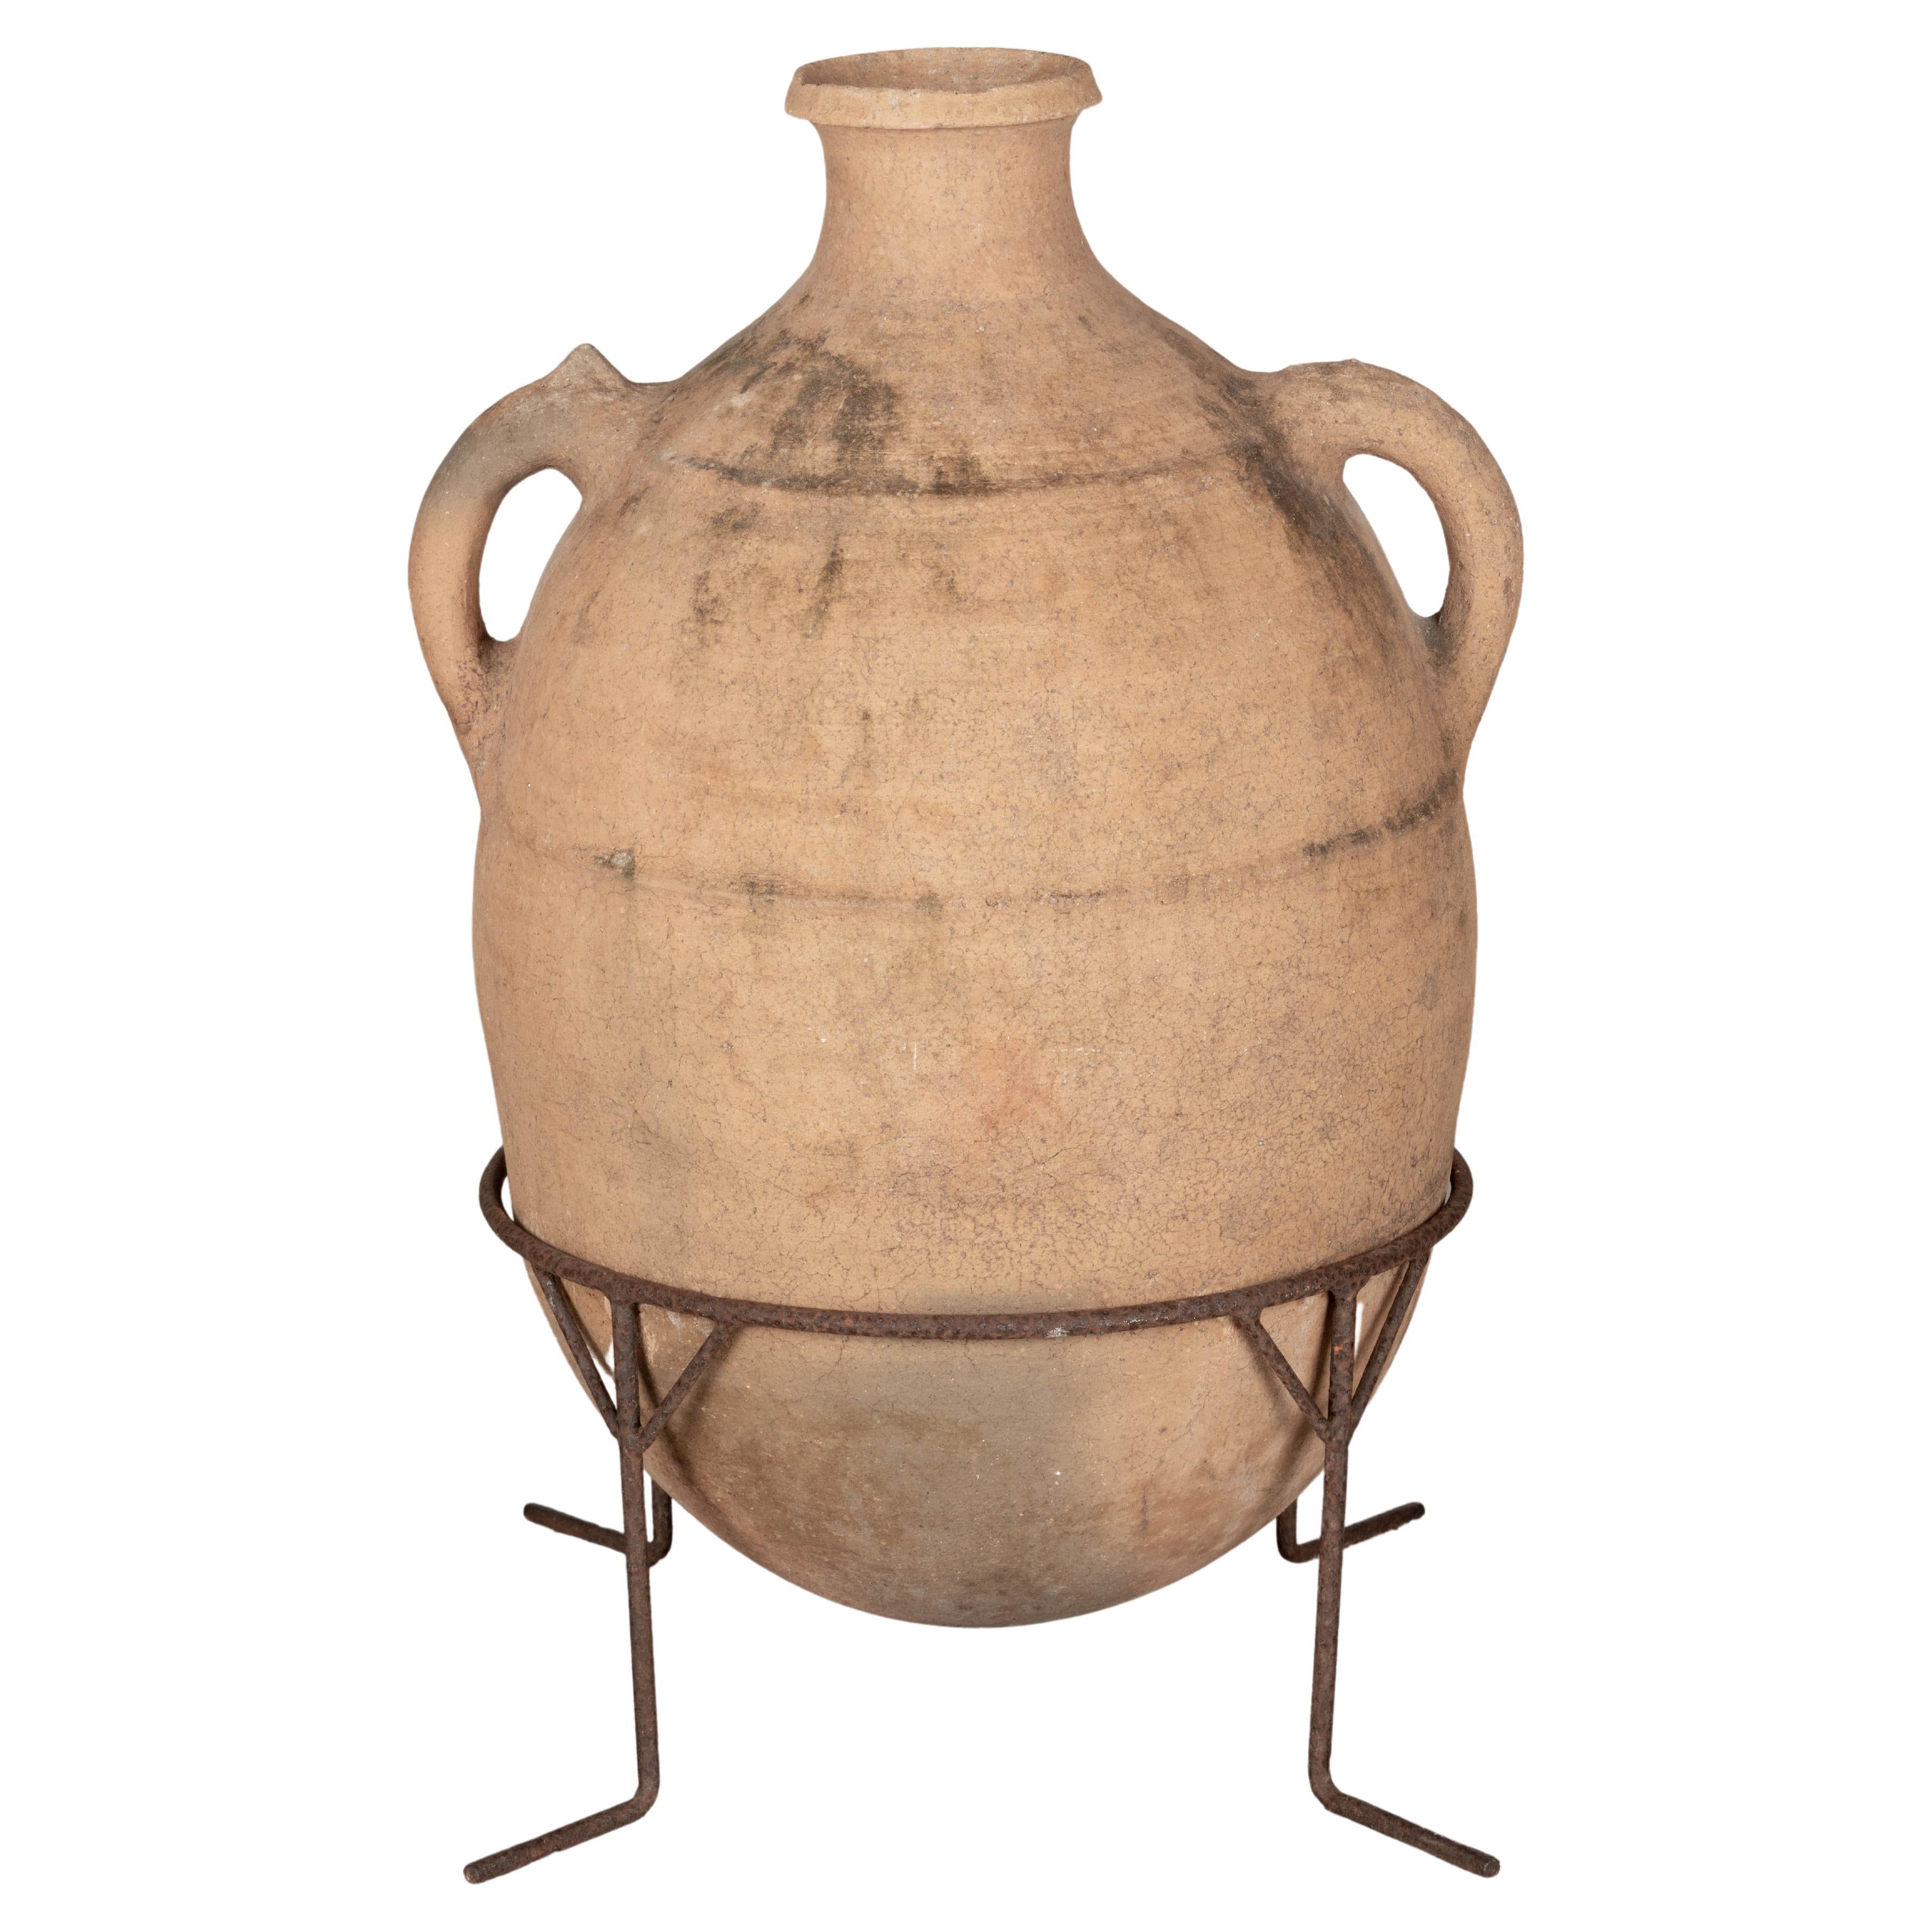 Large Moroccan Terracotta Pottery Water Jar in Iron Stand